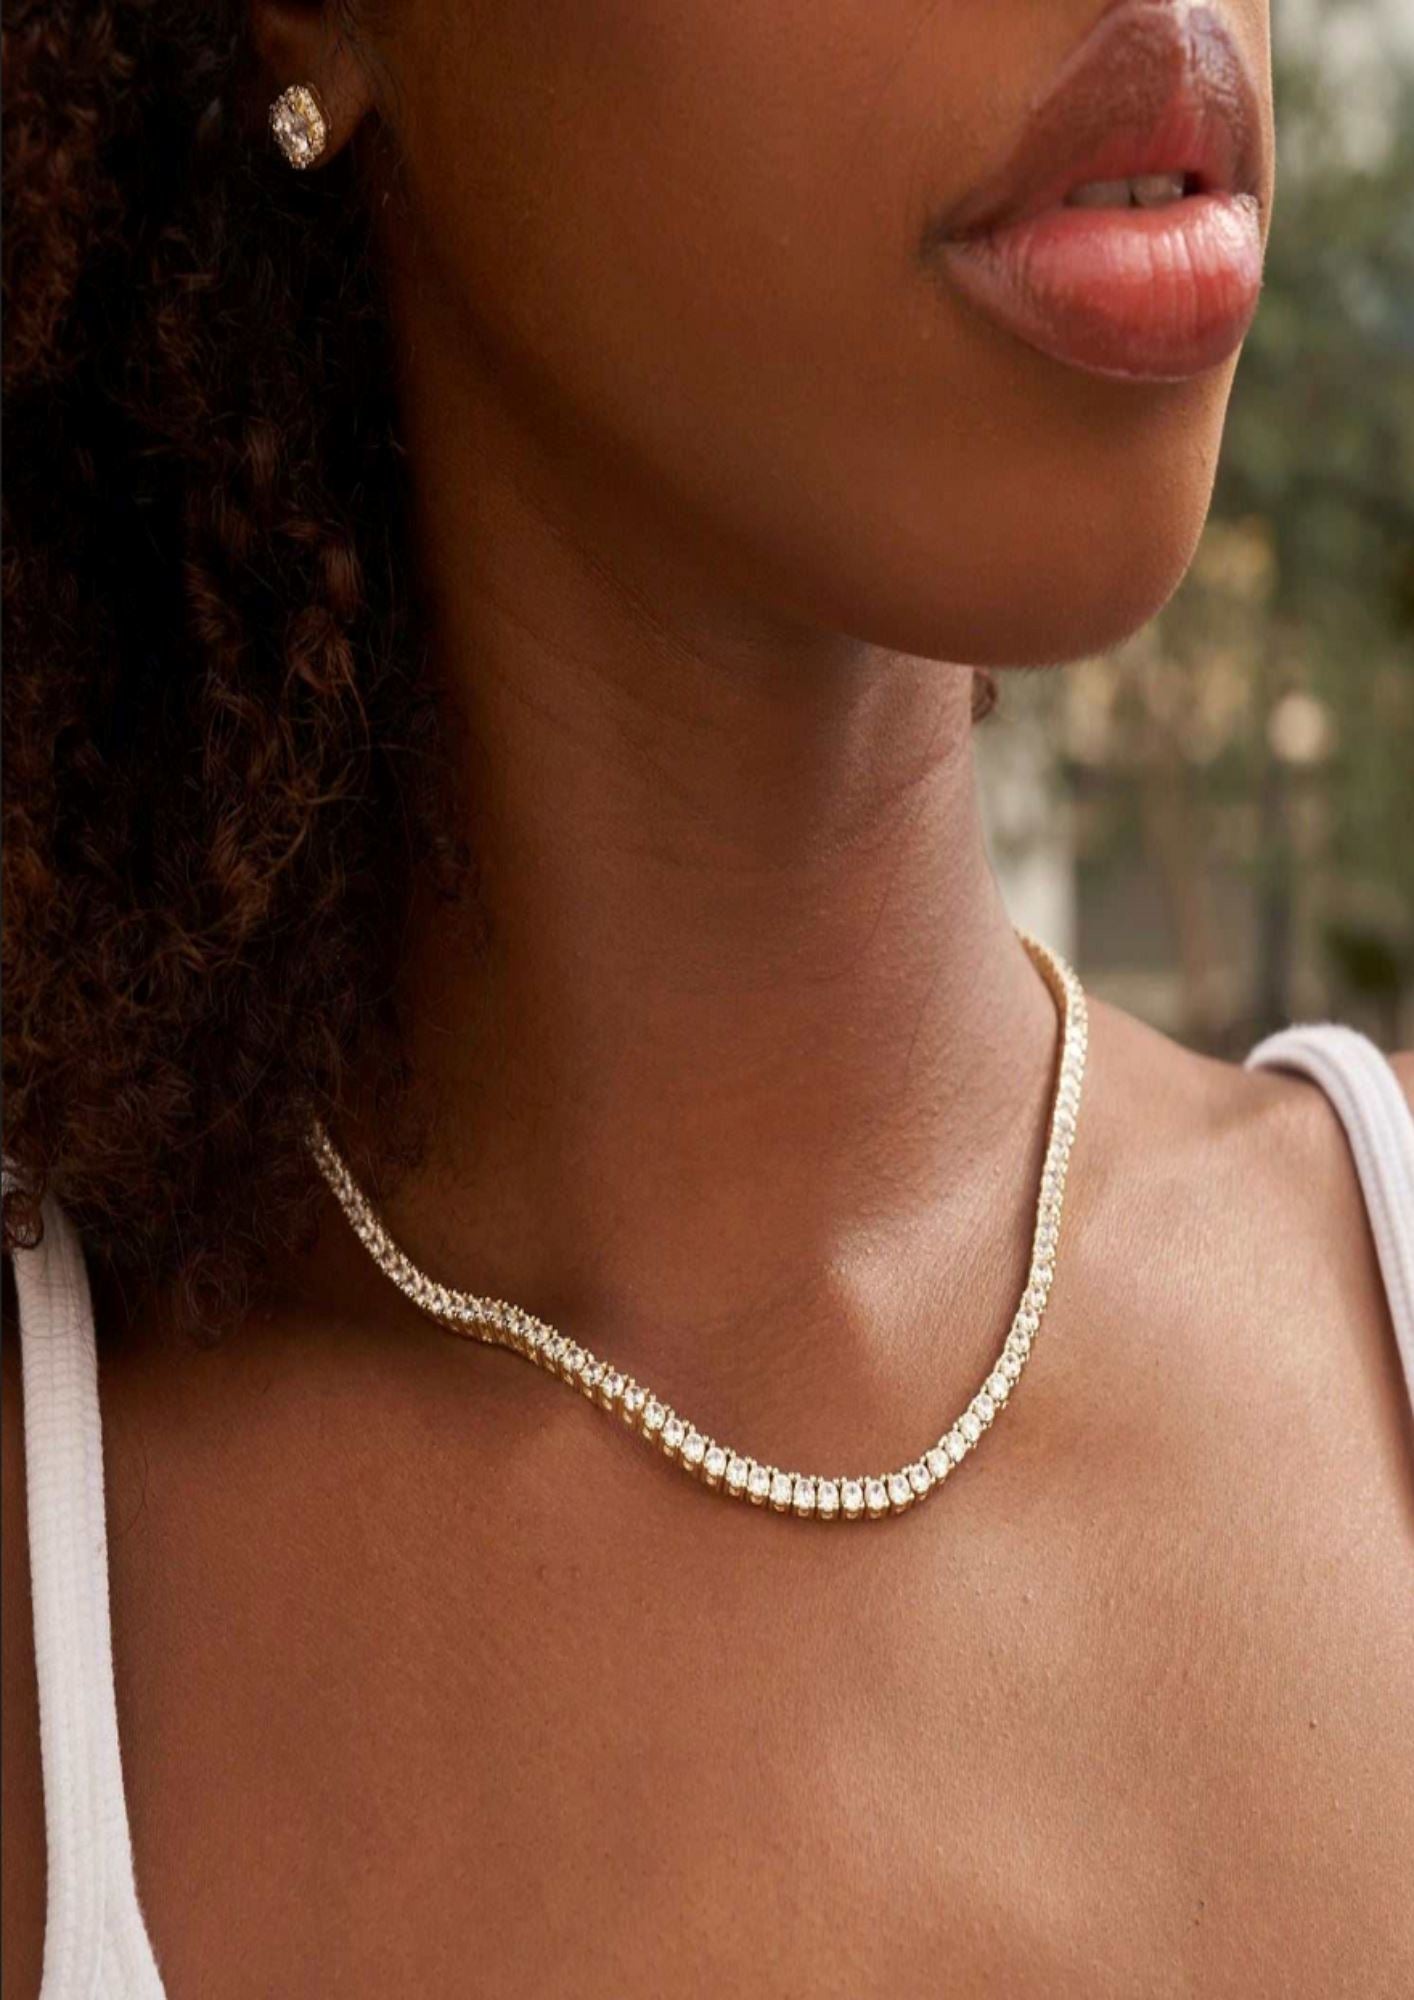 TENNIS NECKLACE - GOLD ring Yubama Jewelry Online Store - The Elegant Designs of Gold and Silver ! 